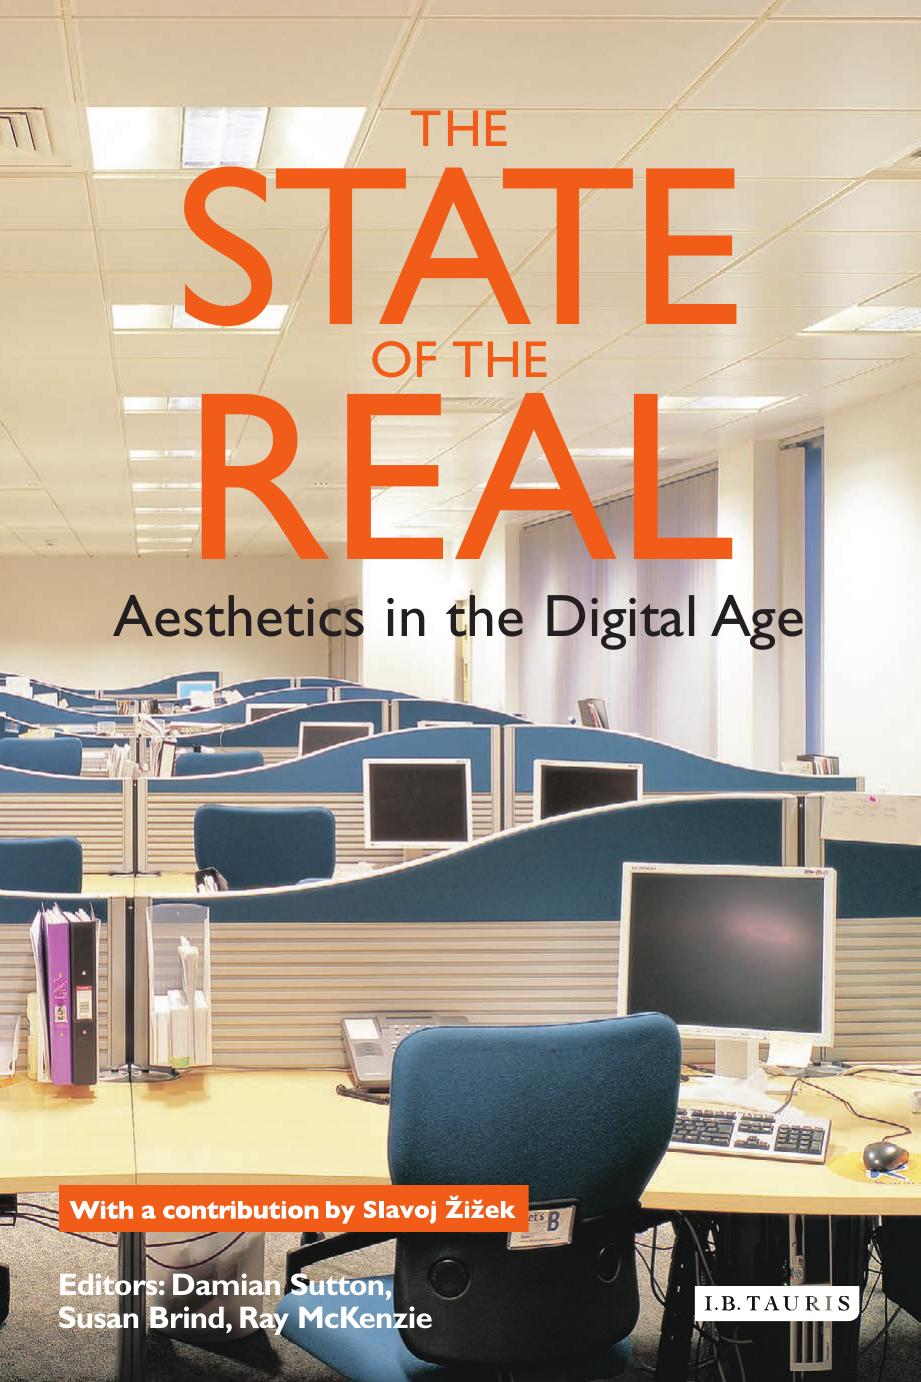 The State of the Real: Aesthetics in the Digital Age by Damian Sutton; Susan Brind; Ray McKenzie (editors)